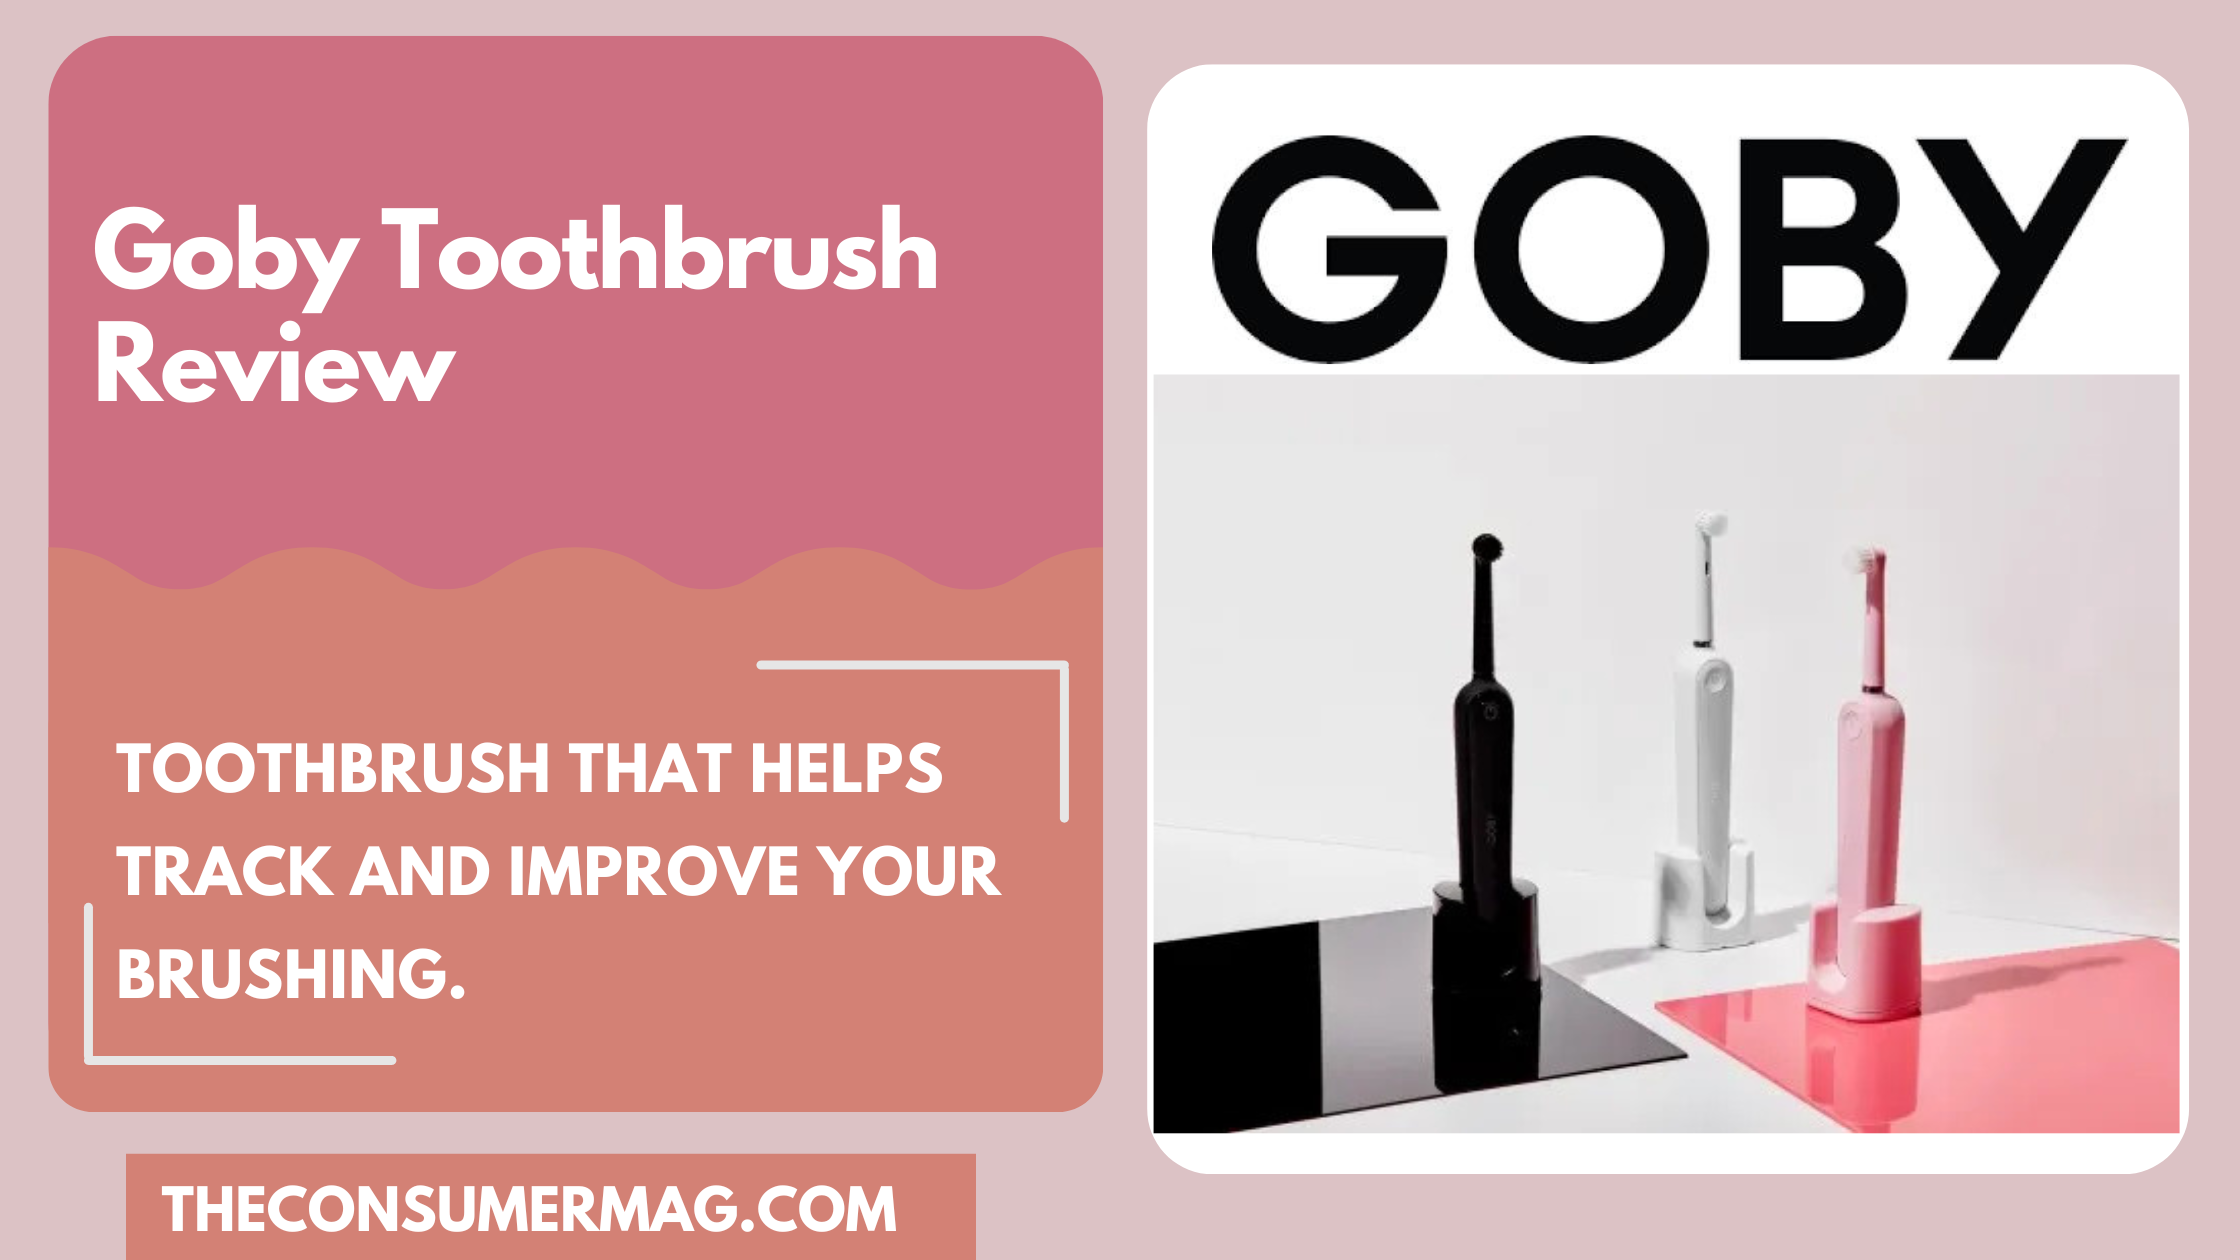 Goby Toothbrush featured image